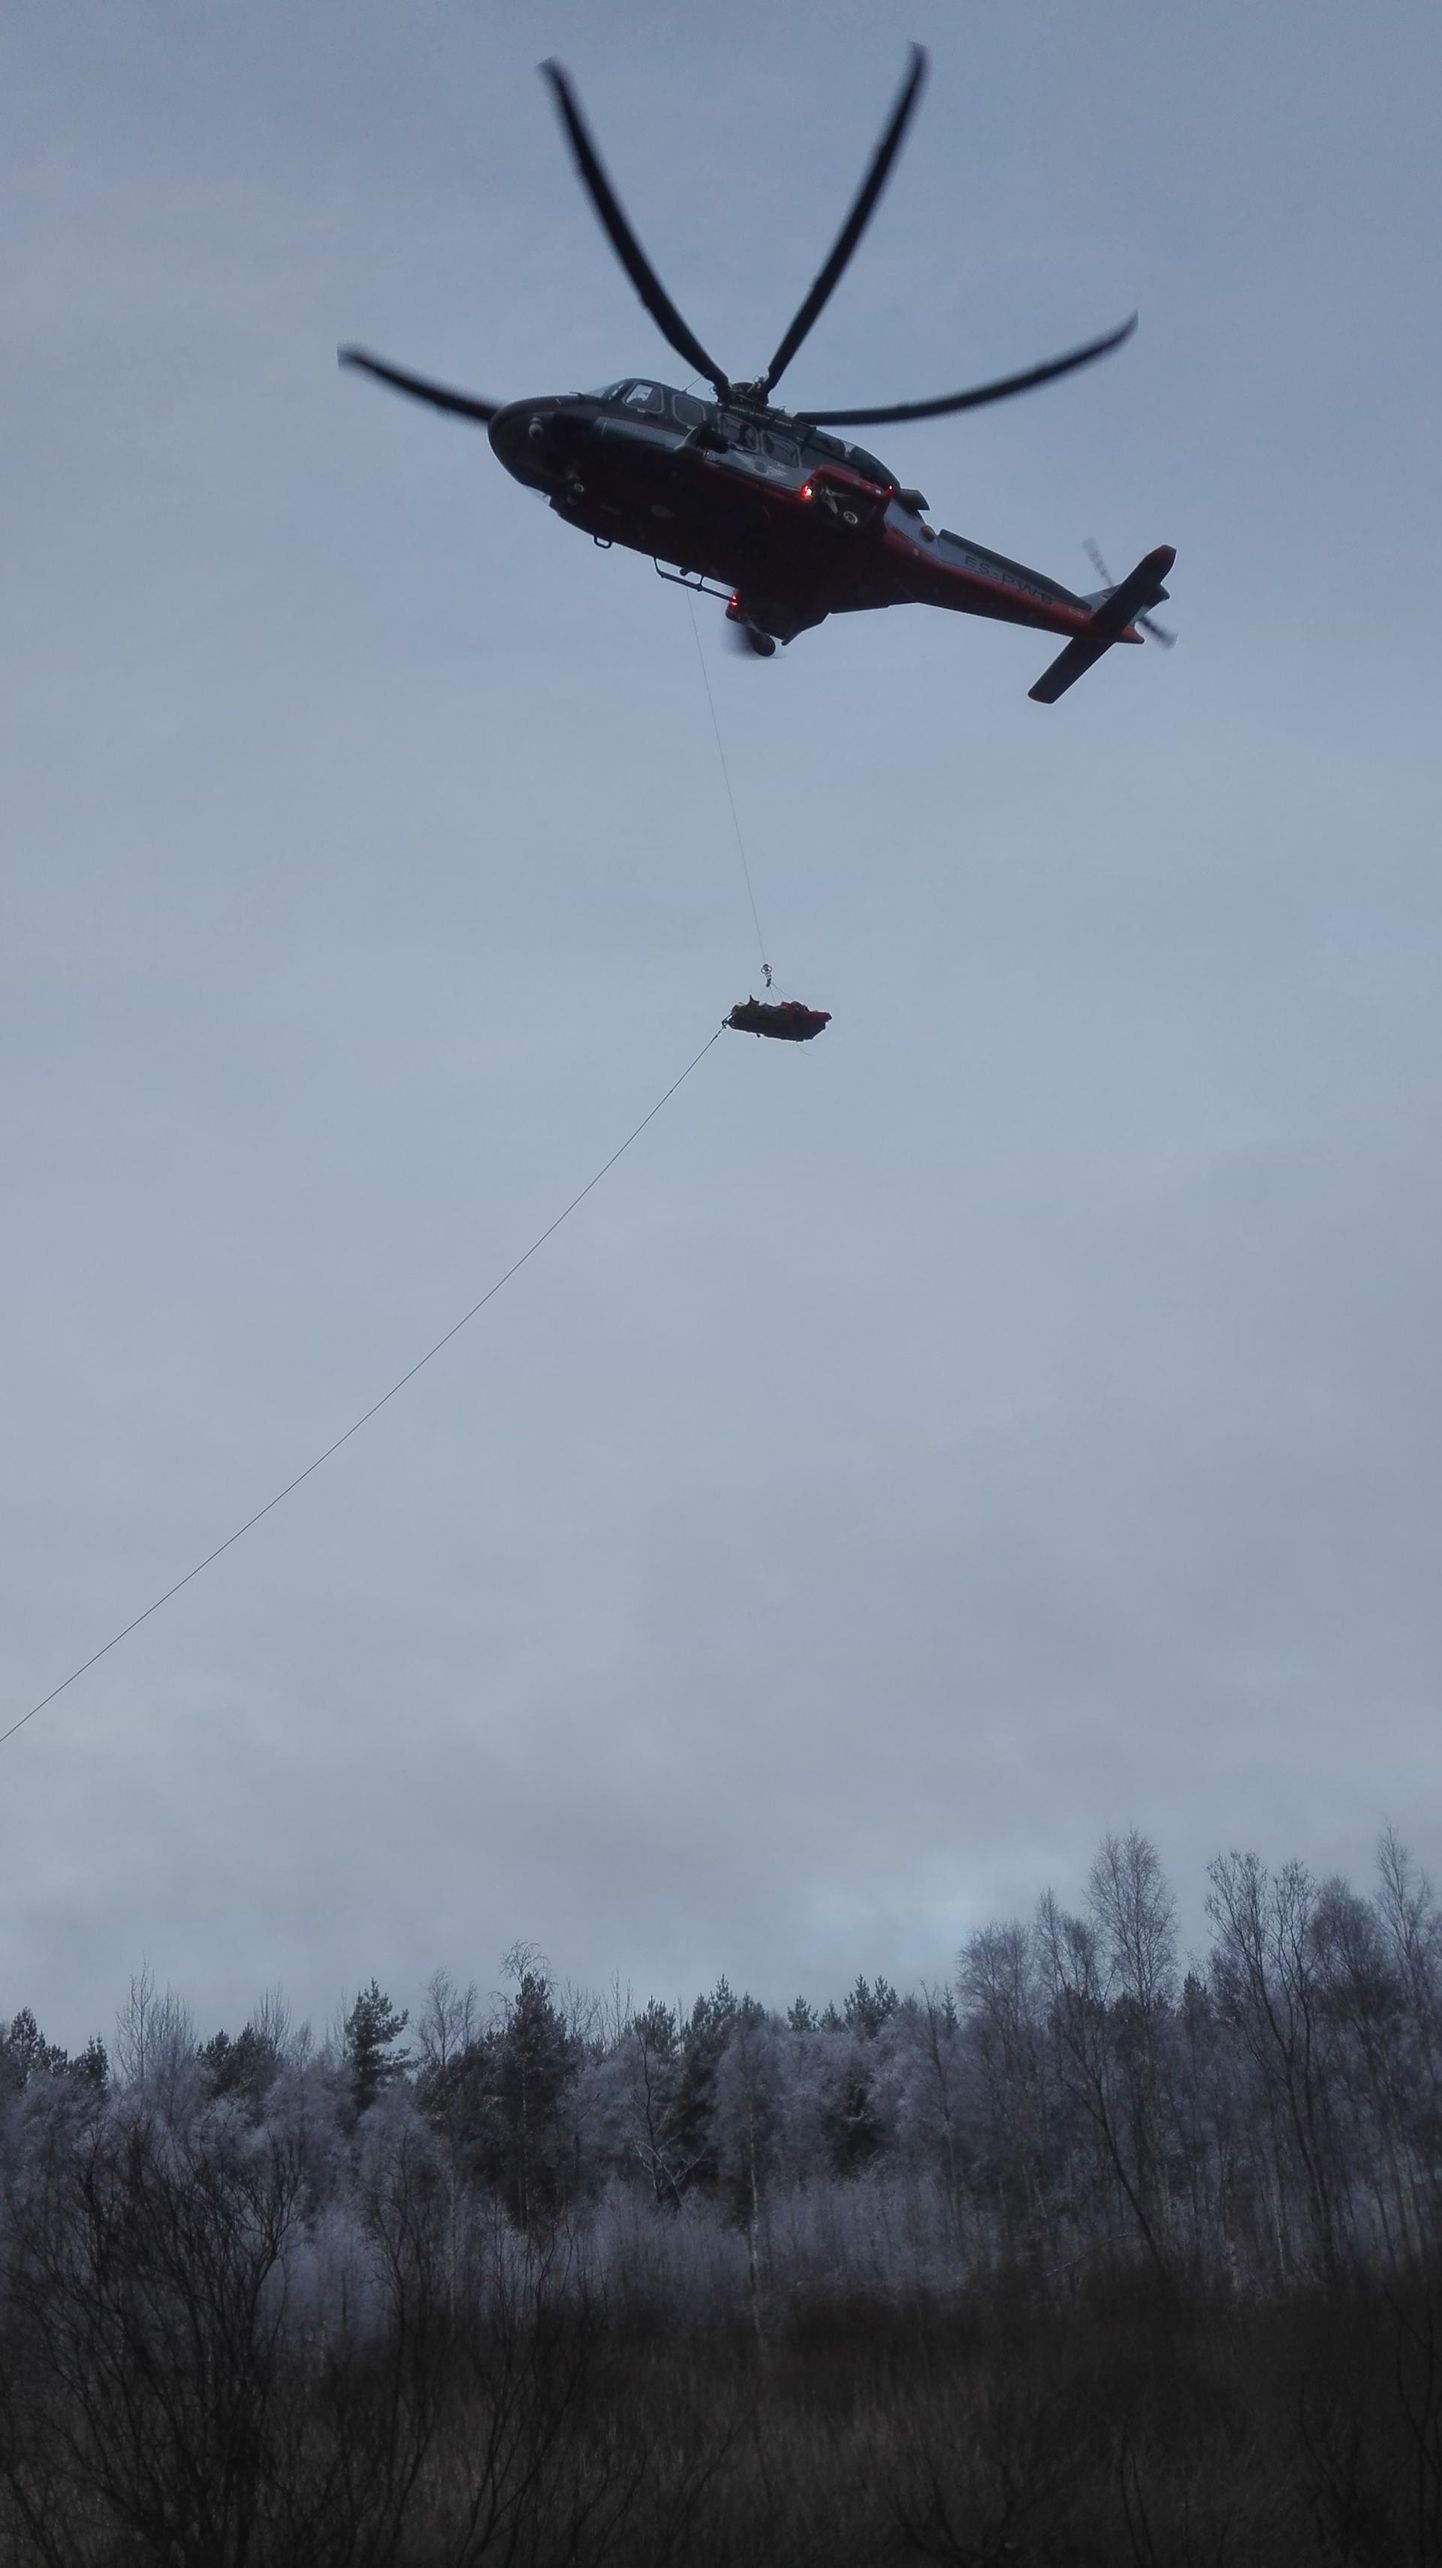 The young woman was airlifted to the North Estonia Medical Center.